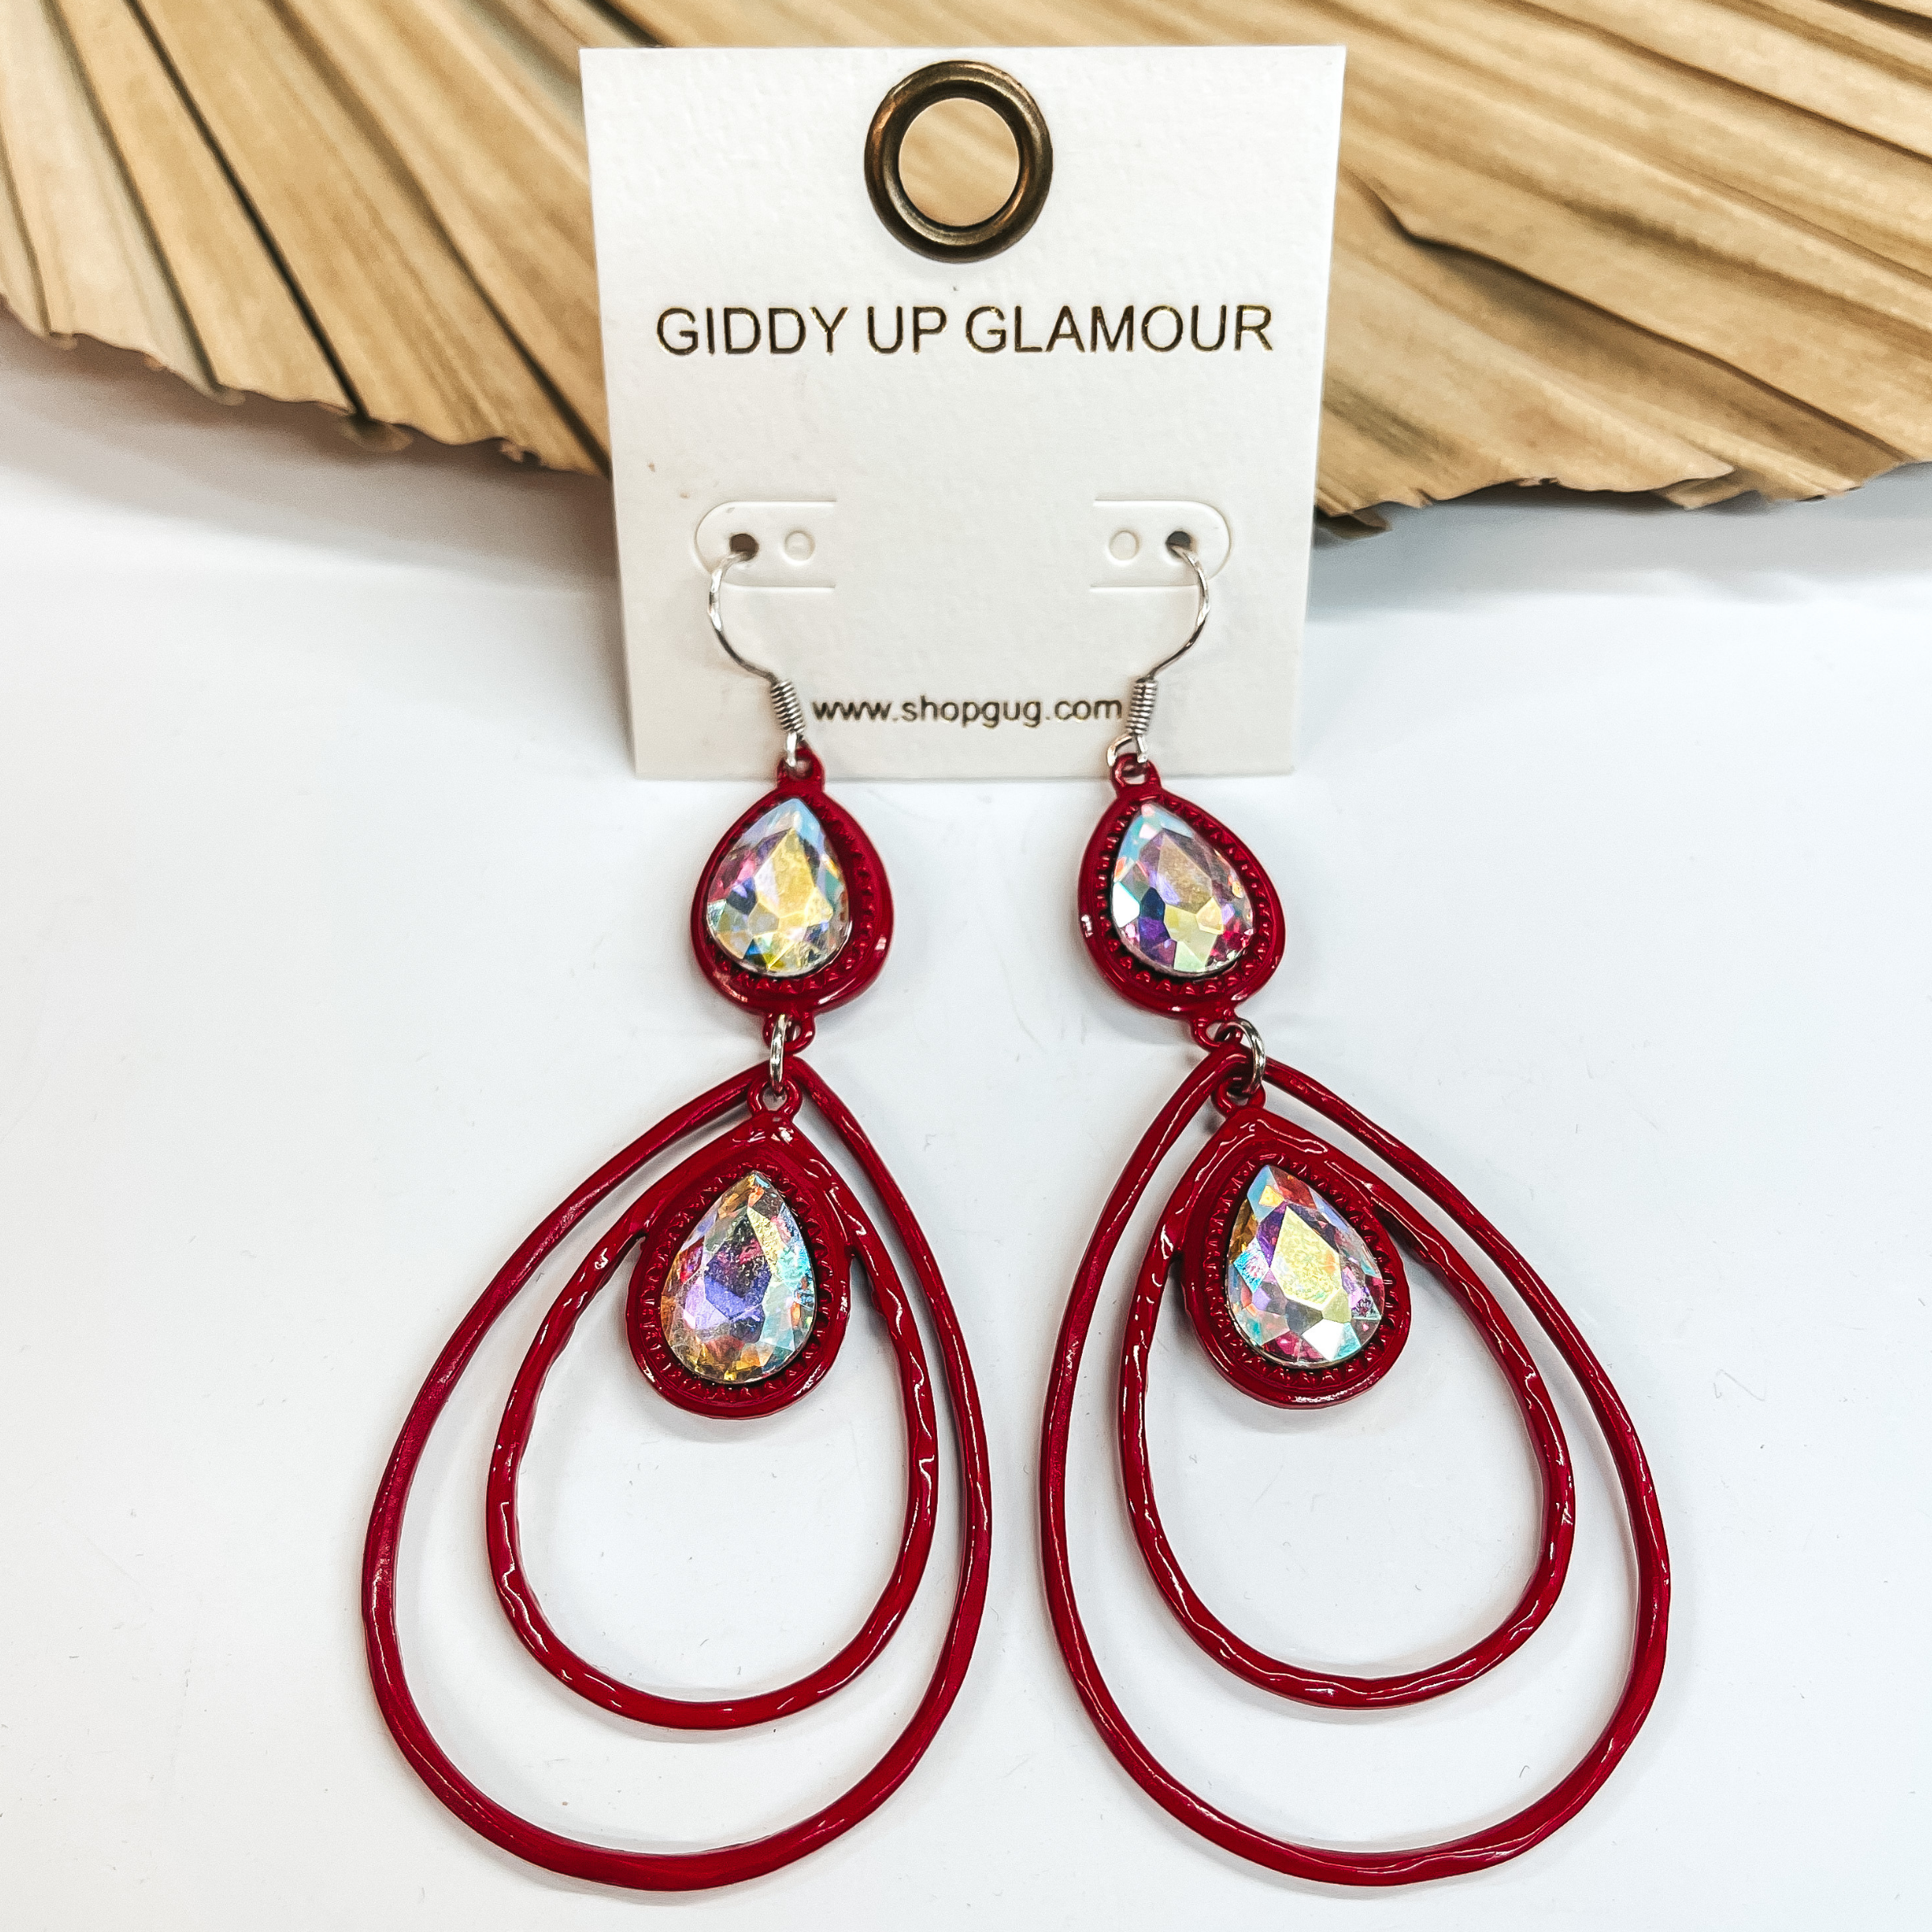 Red double teardrop earrings with two teardrop cut ab crystals. Teardrop cut ab crystal in a red setting then two red teardrops with another ab crystal inside. Taken on a white background and leaned up against a dried up palm leaf.